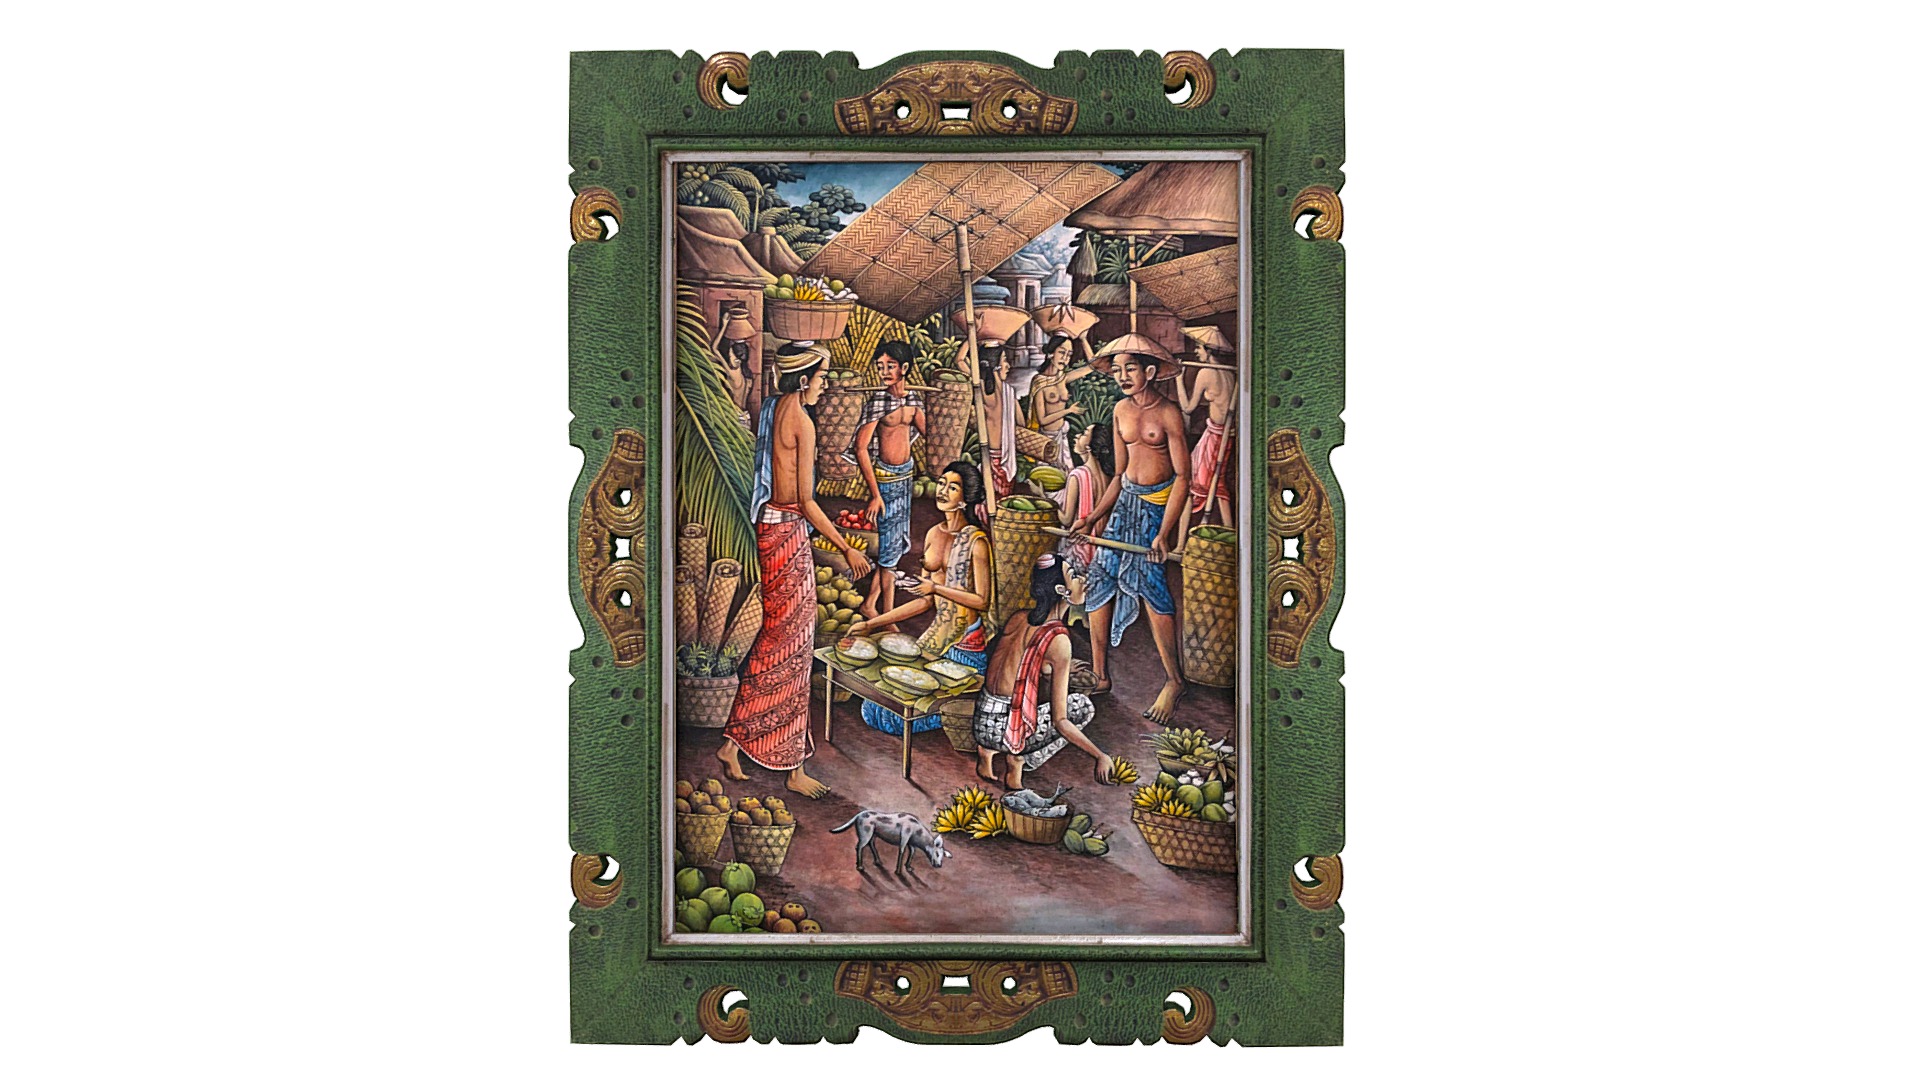 3D model Balinese picture green frame rural landscape - This is a 3D model of the Balinese picture green frame rural landscape. The 3D model is about a green box with a painting on it.